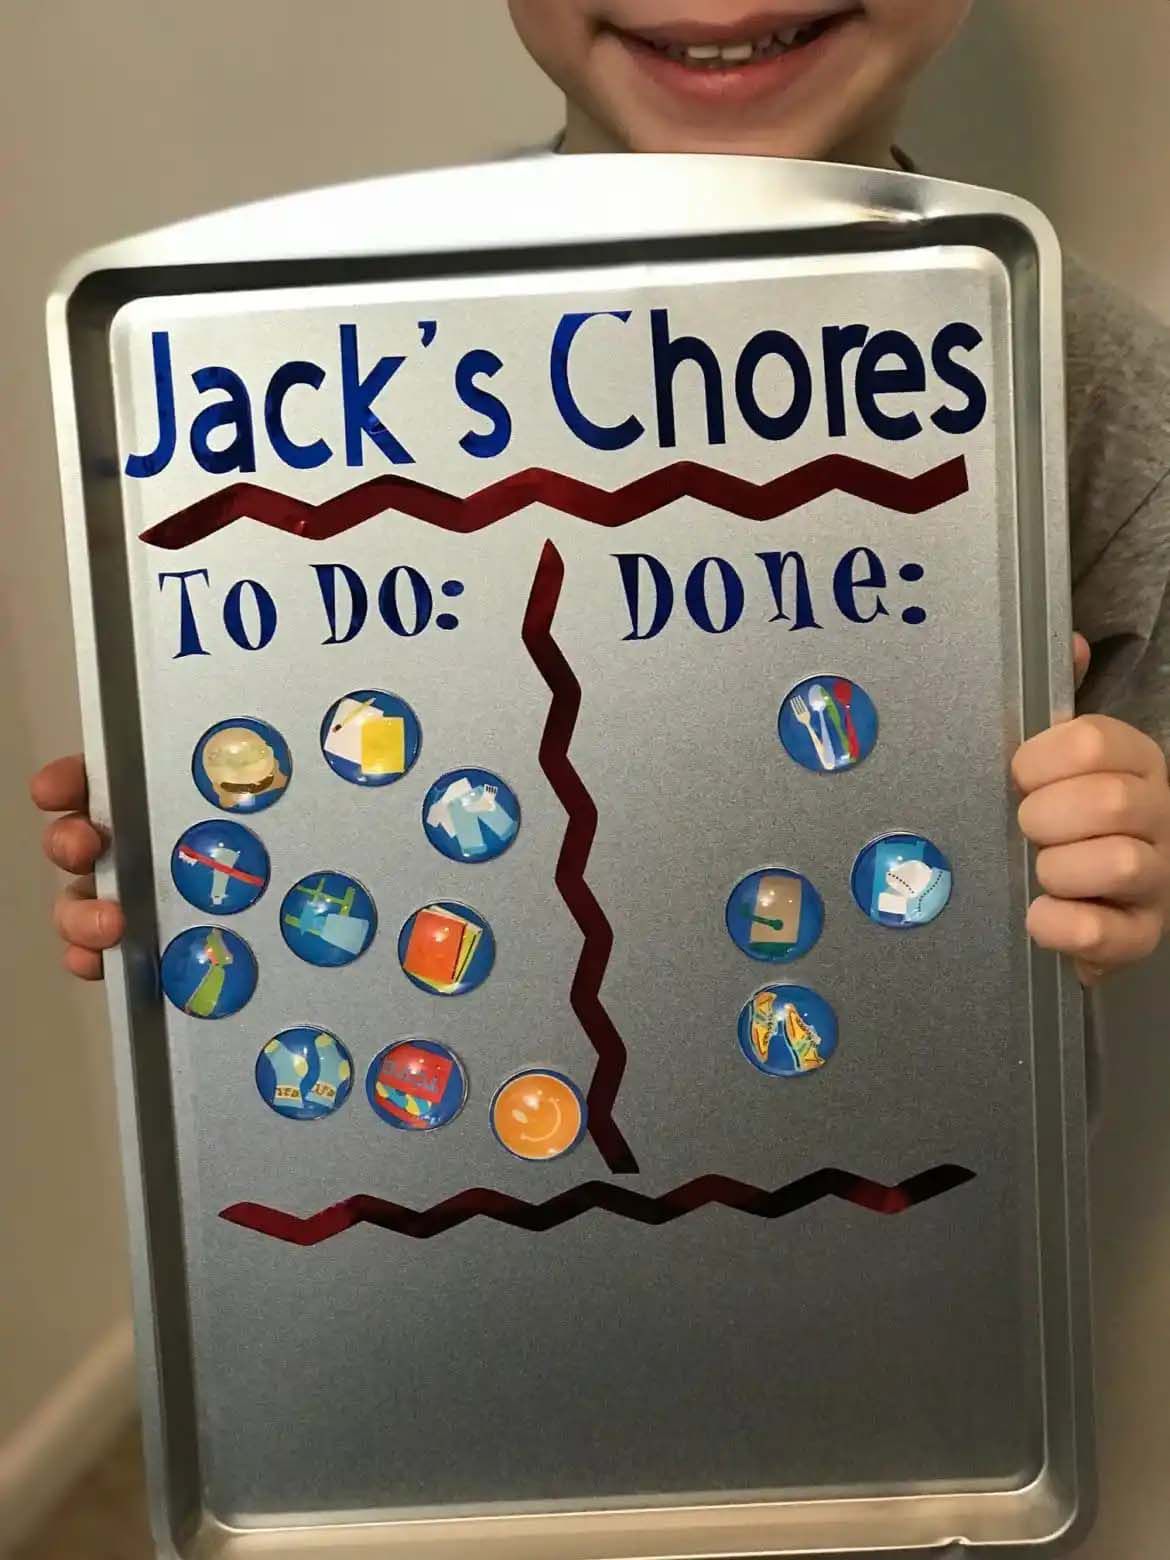 A child holding a magnet chore chart